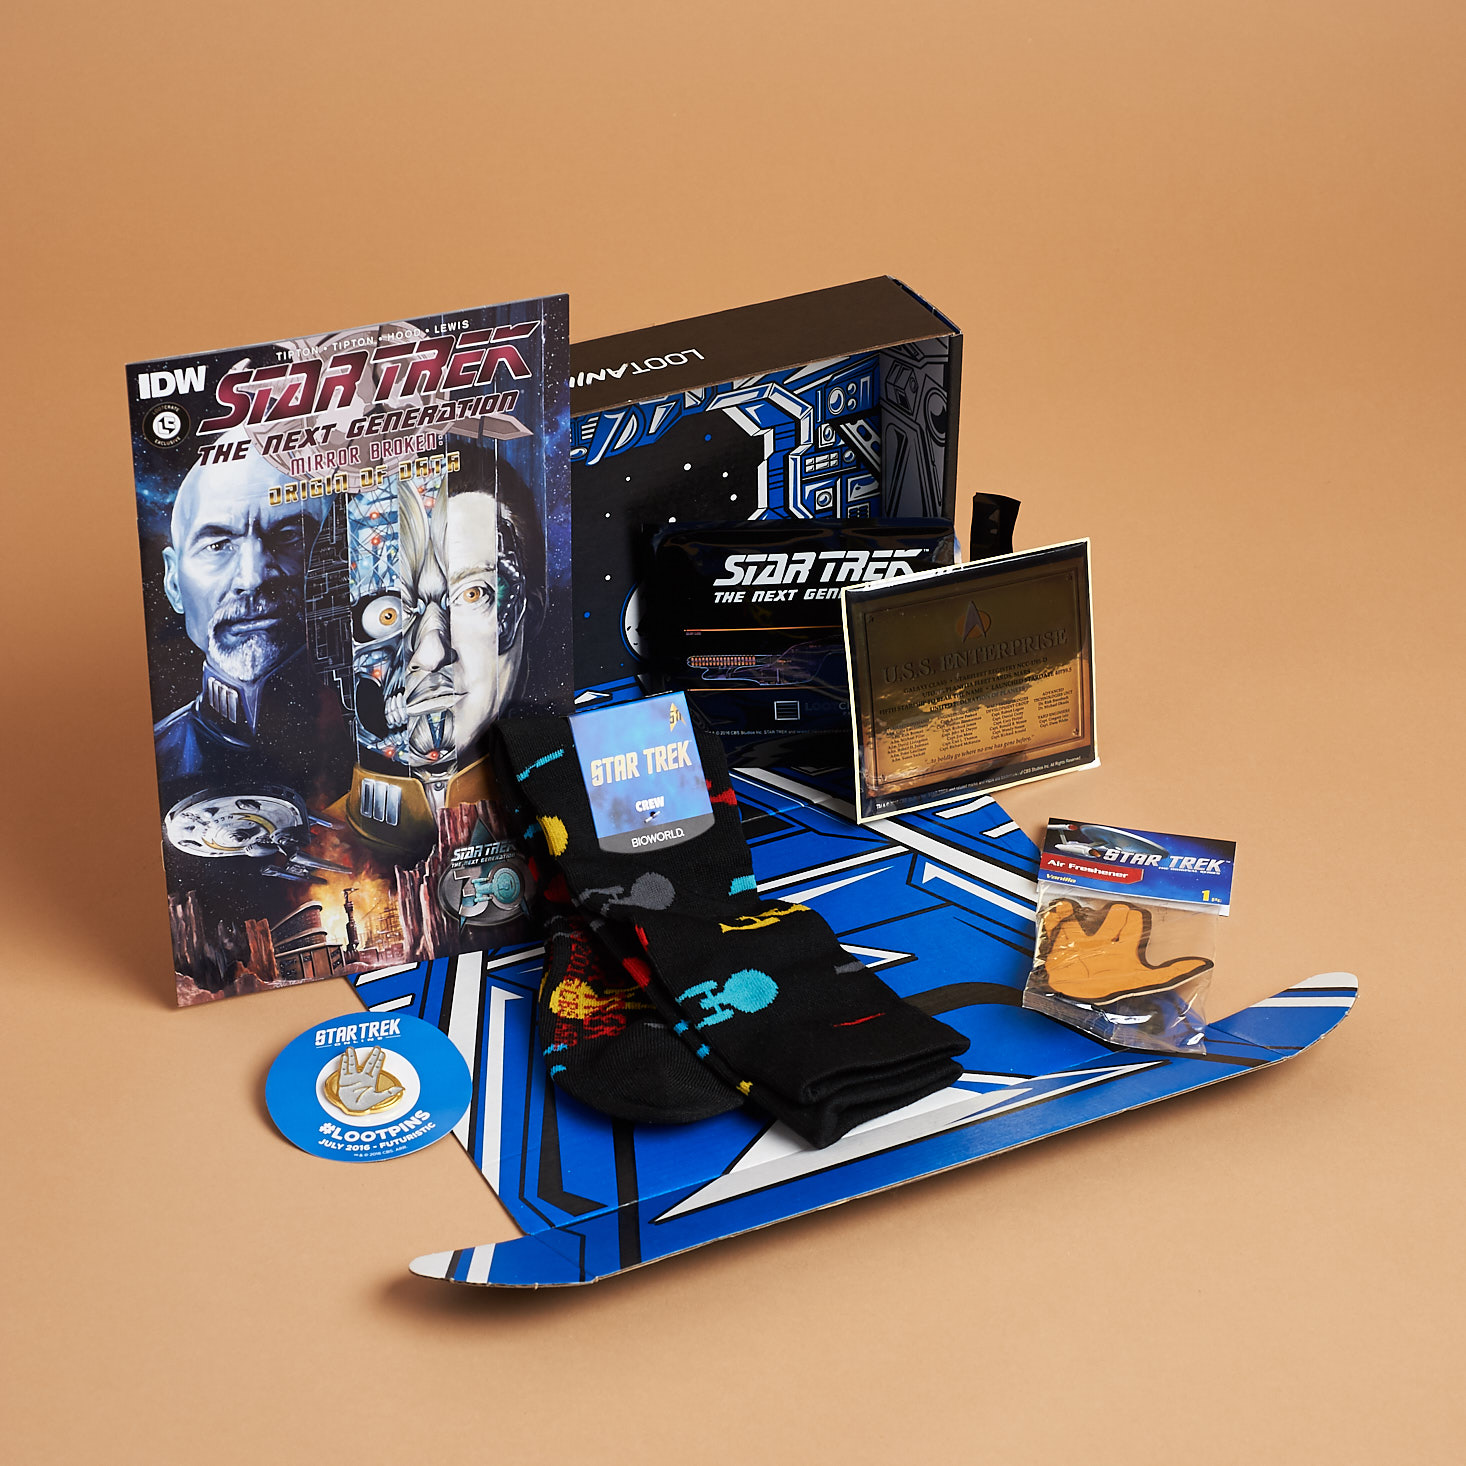 Star Trek Mission Crate Holiday Apology Box